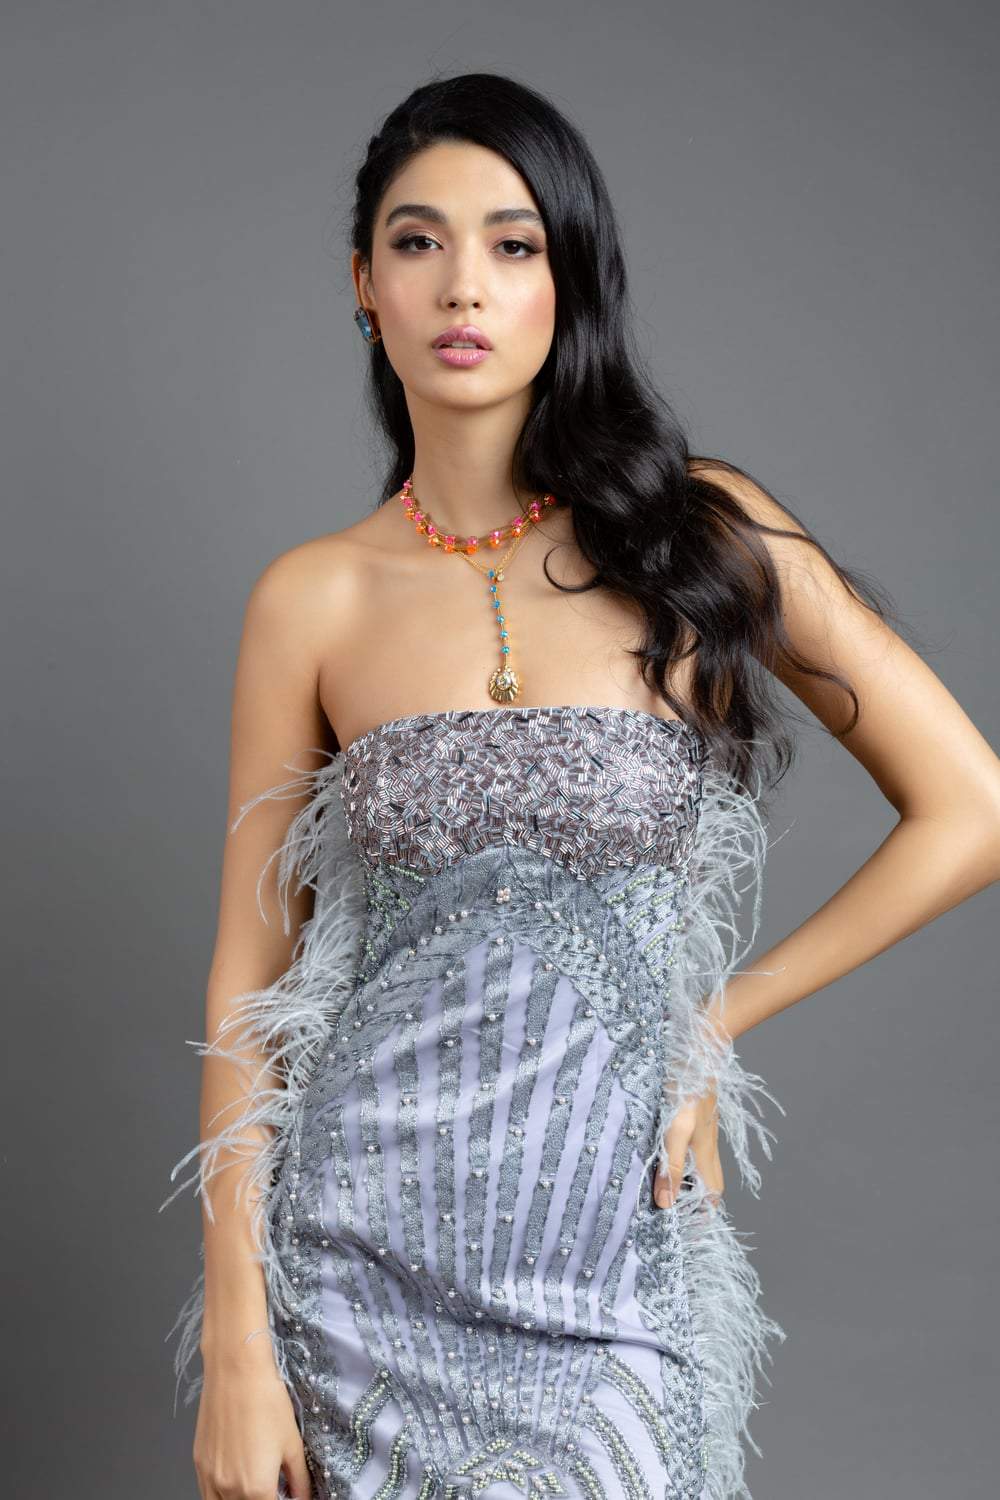 The Silver Bedazzled Gown